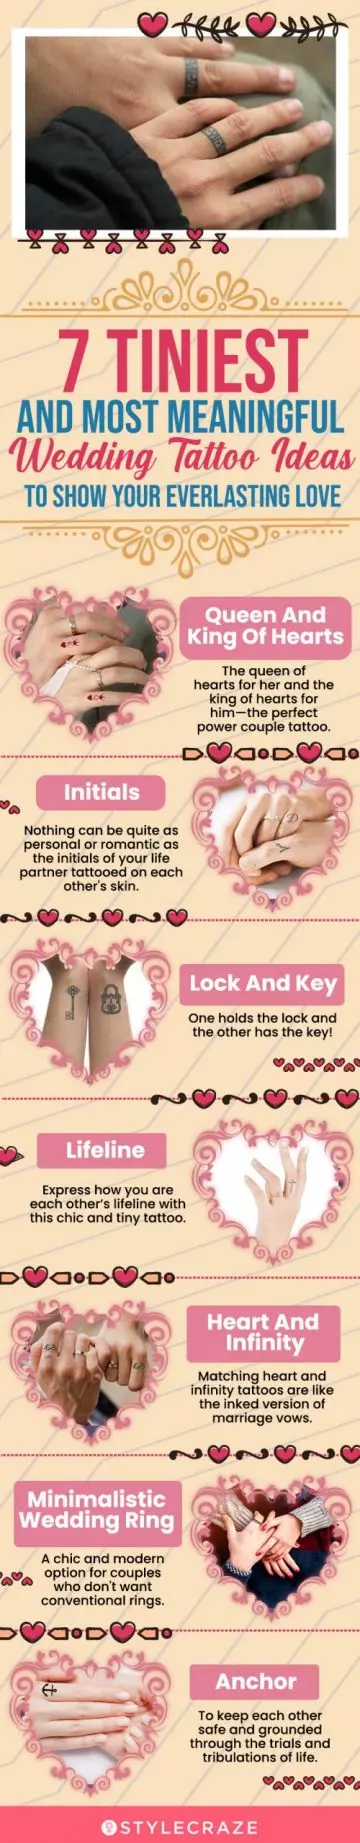 7 tiniest and most meaningful wedding tattoo ideas to commemorate your promise of everlasting love (infographic)